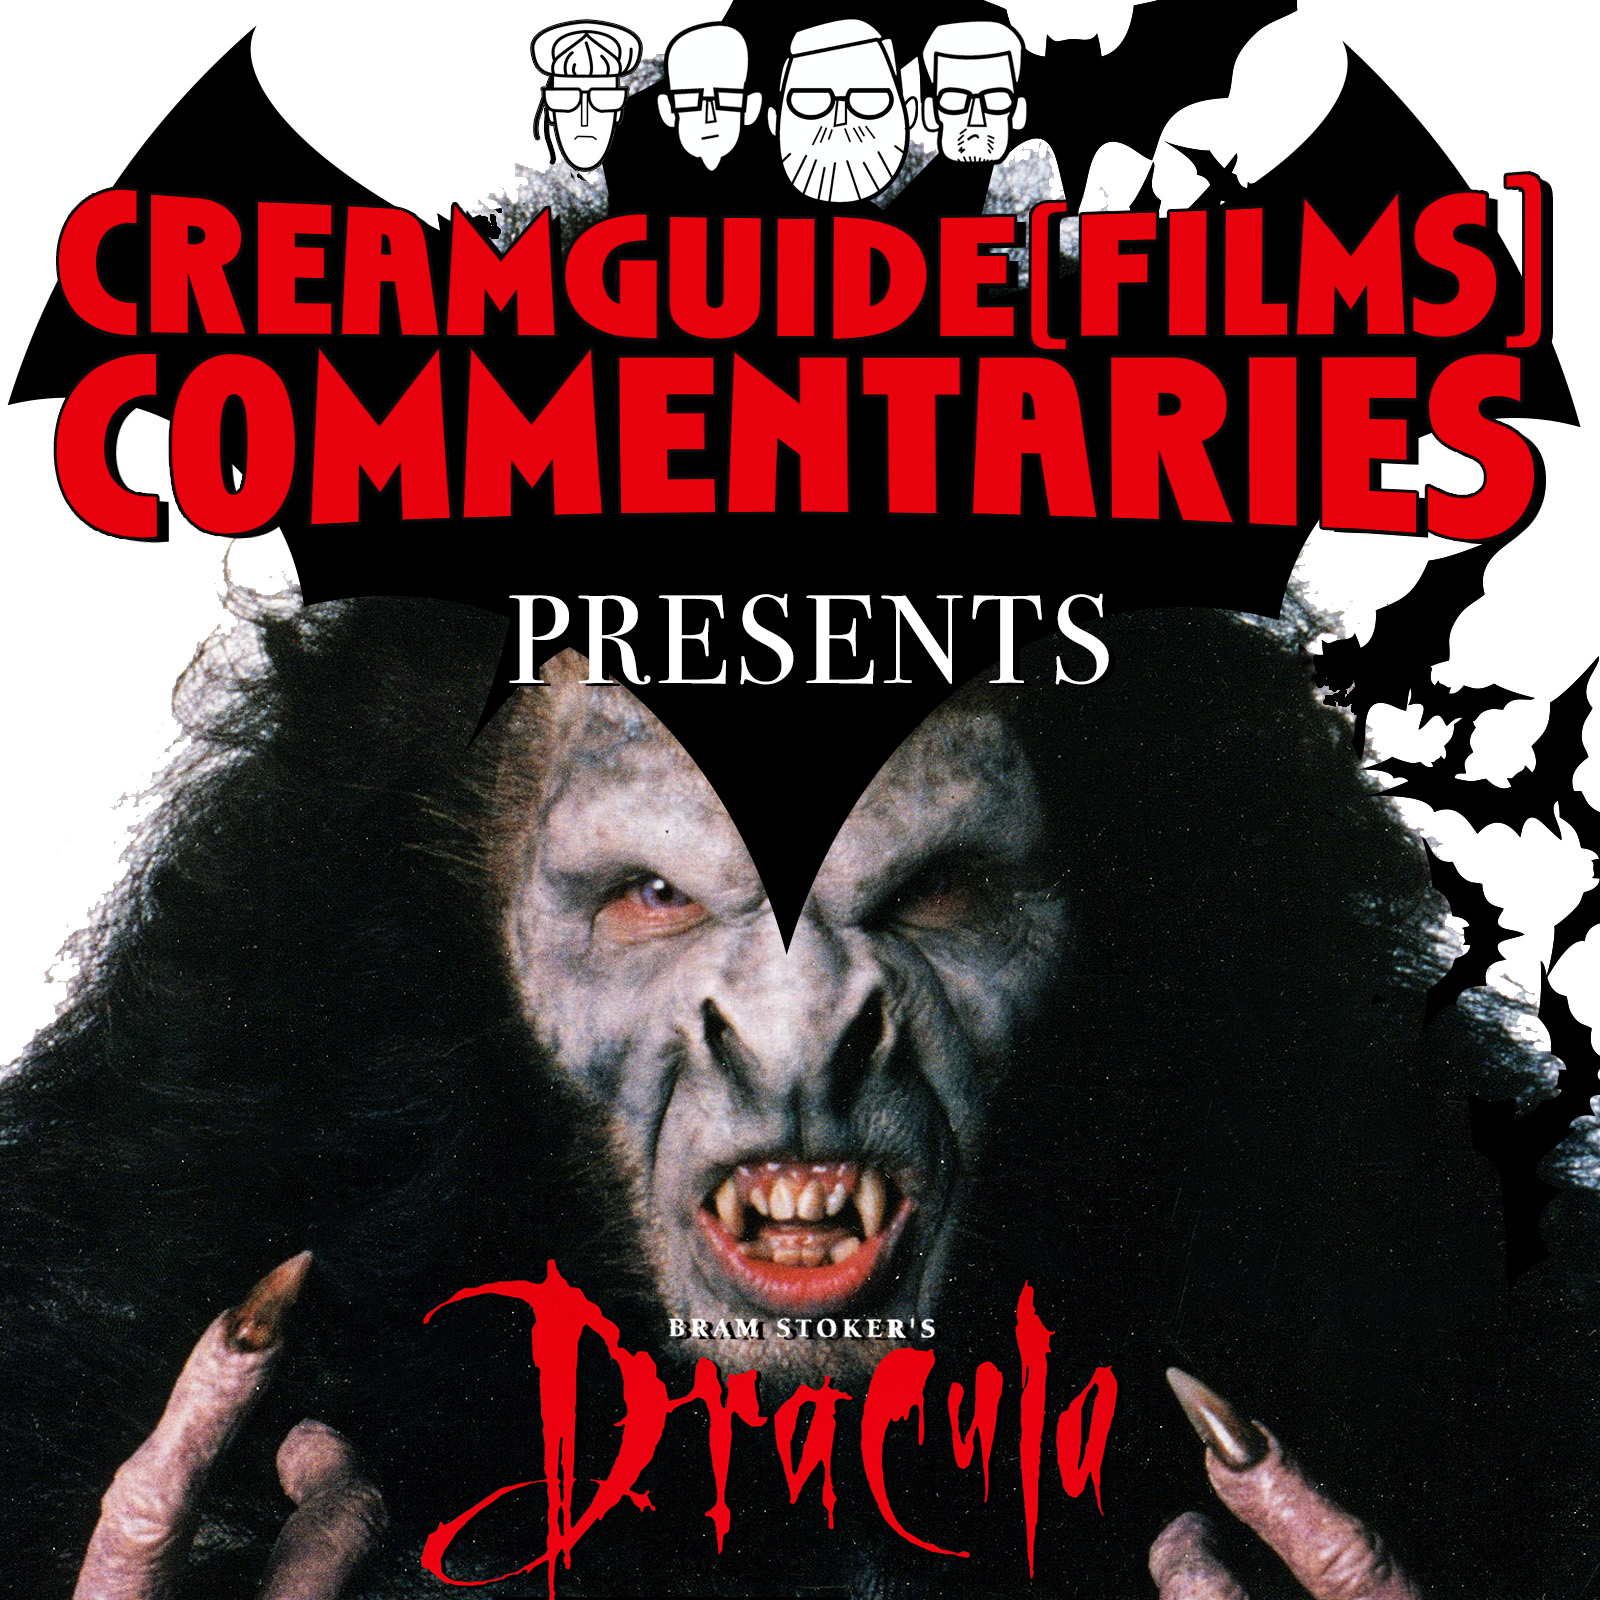 Creamguide (Films) Commentaries: Dracula